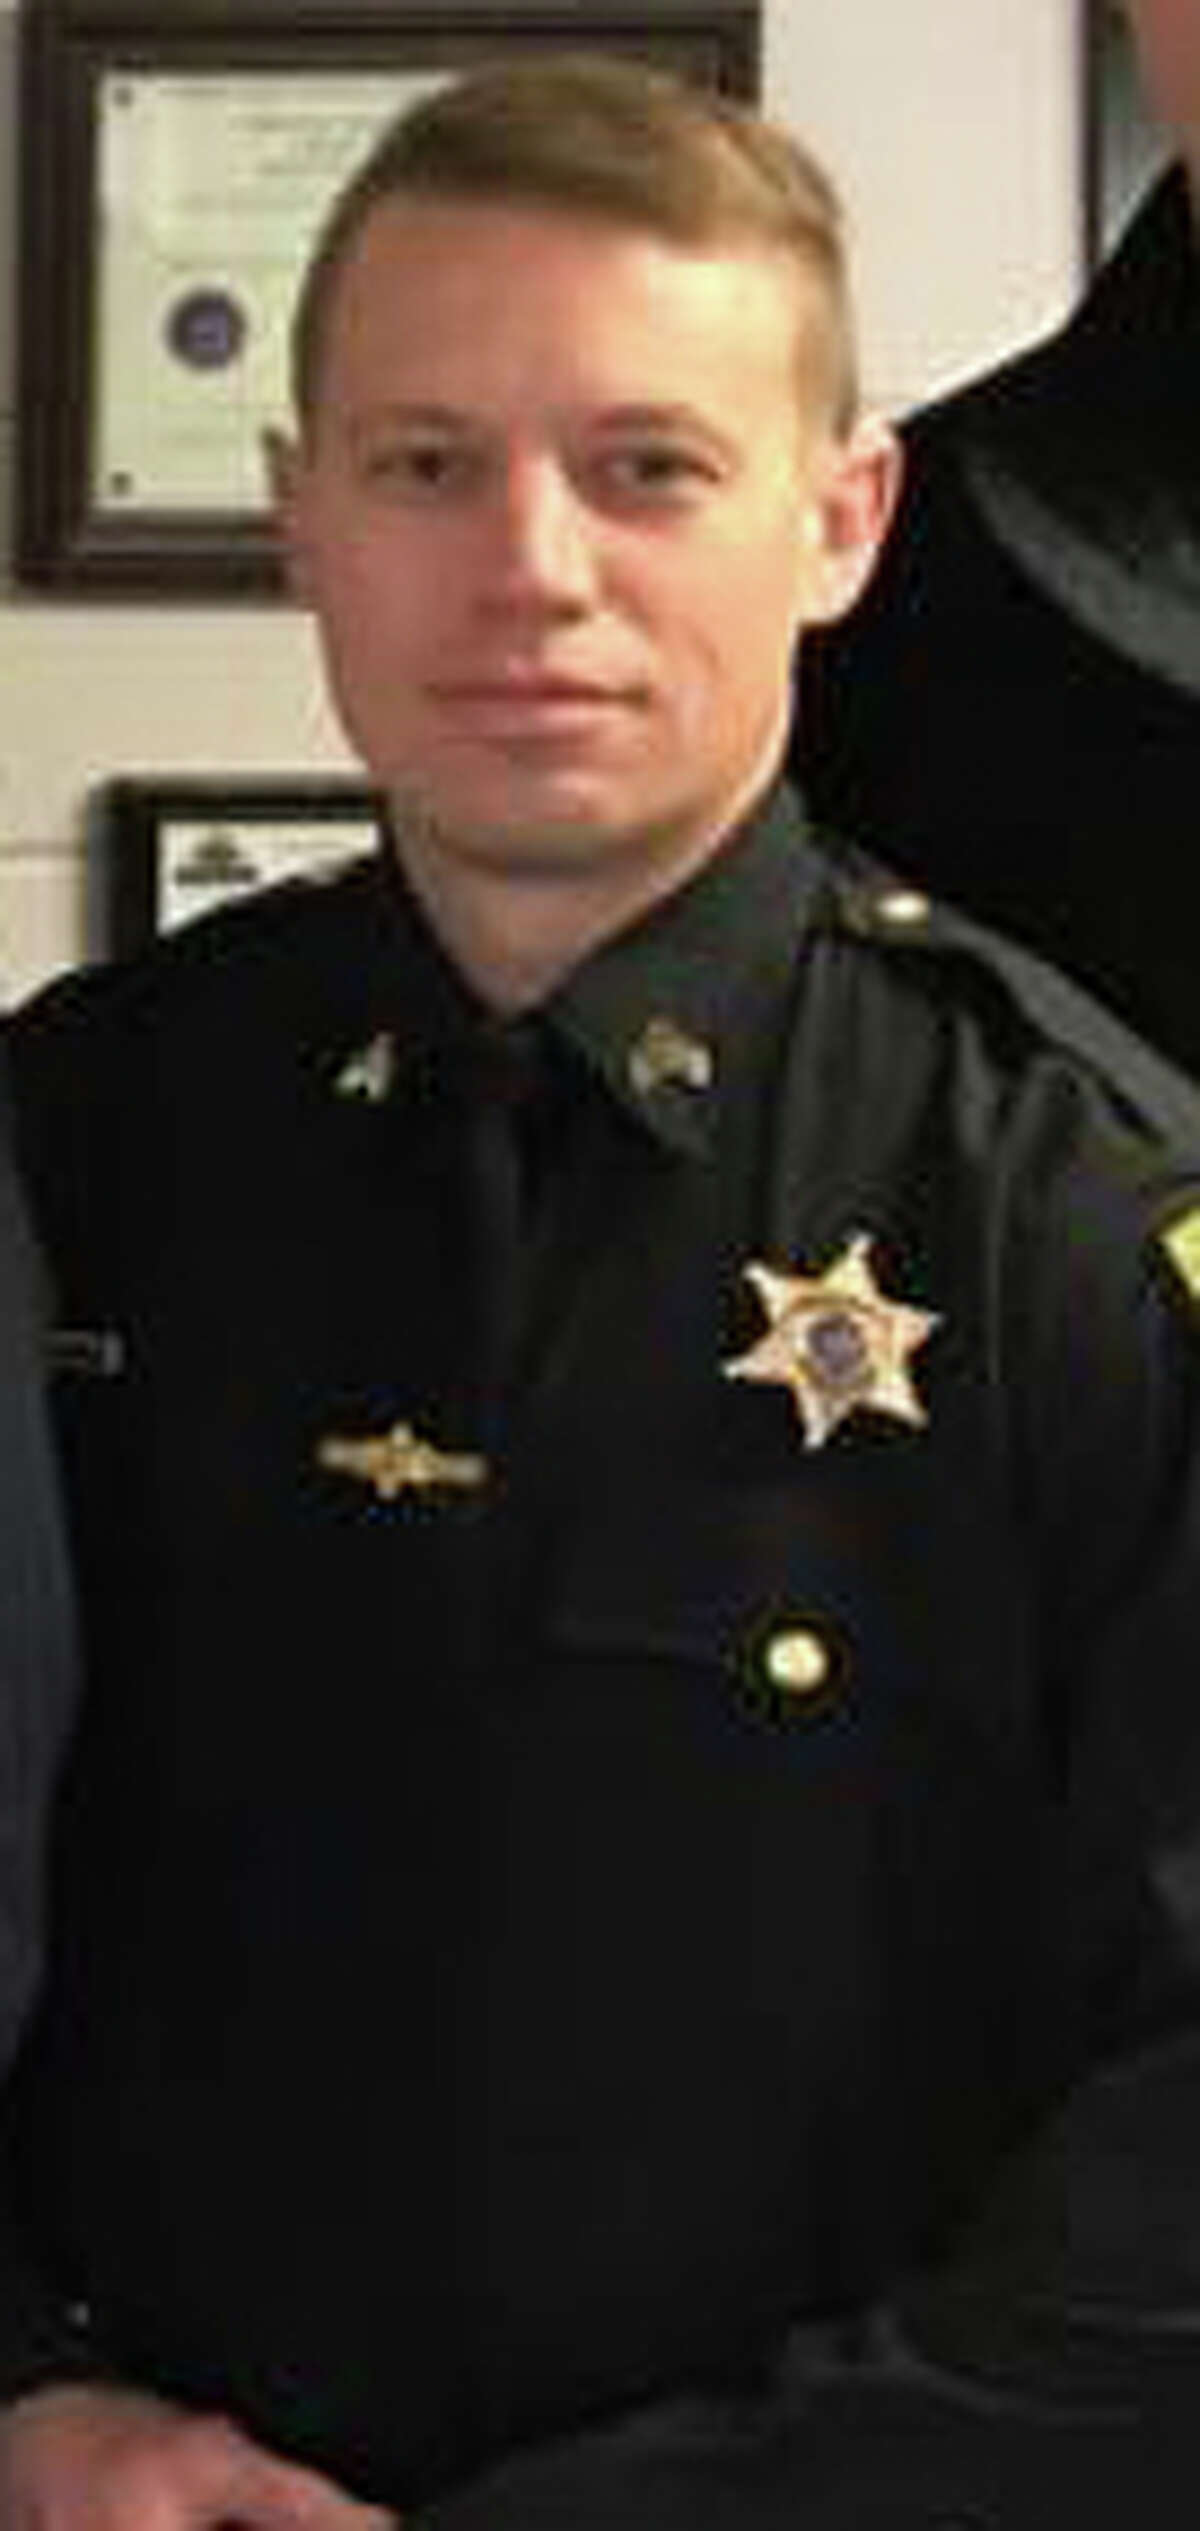 Peter Farnum, former sergeant for the Saratoga County Sheriff's Office